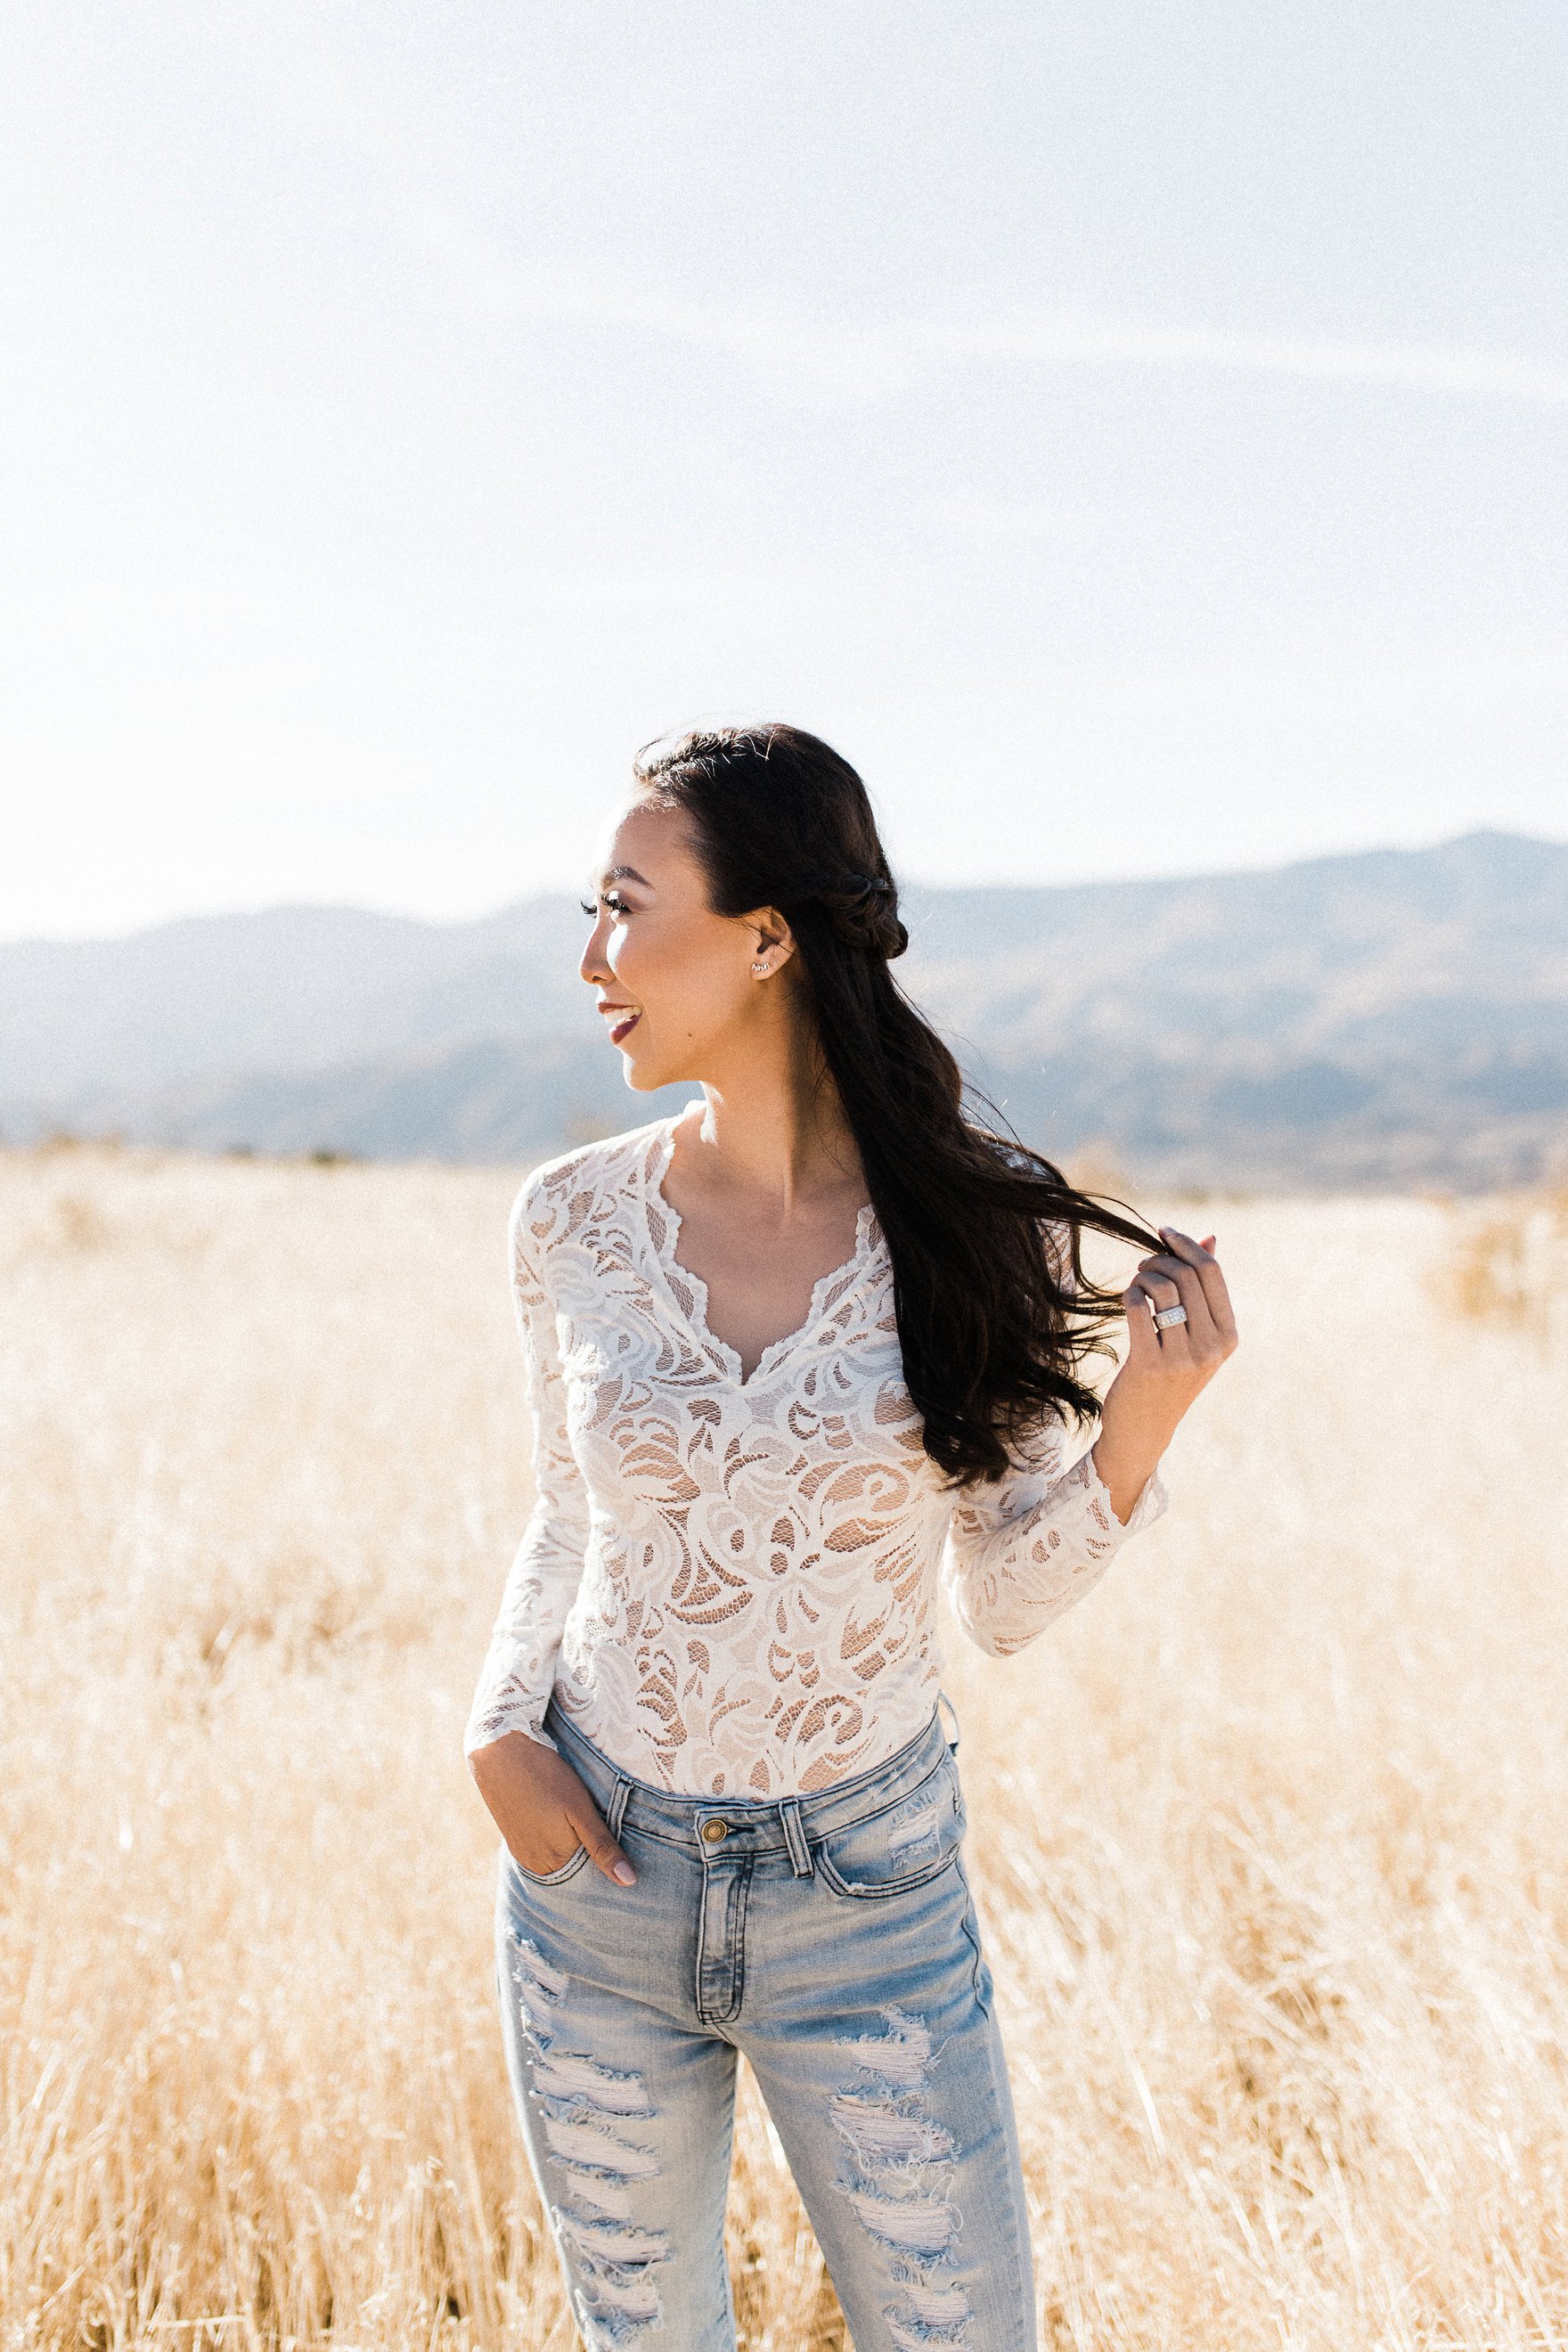 wind in hair white lace bodysuit high waist ripped jeans in a field Diana Elizabeth blogger photography by Autumn Renae